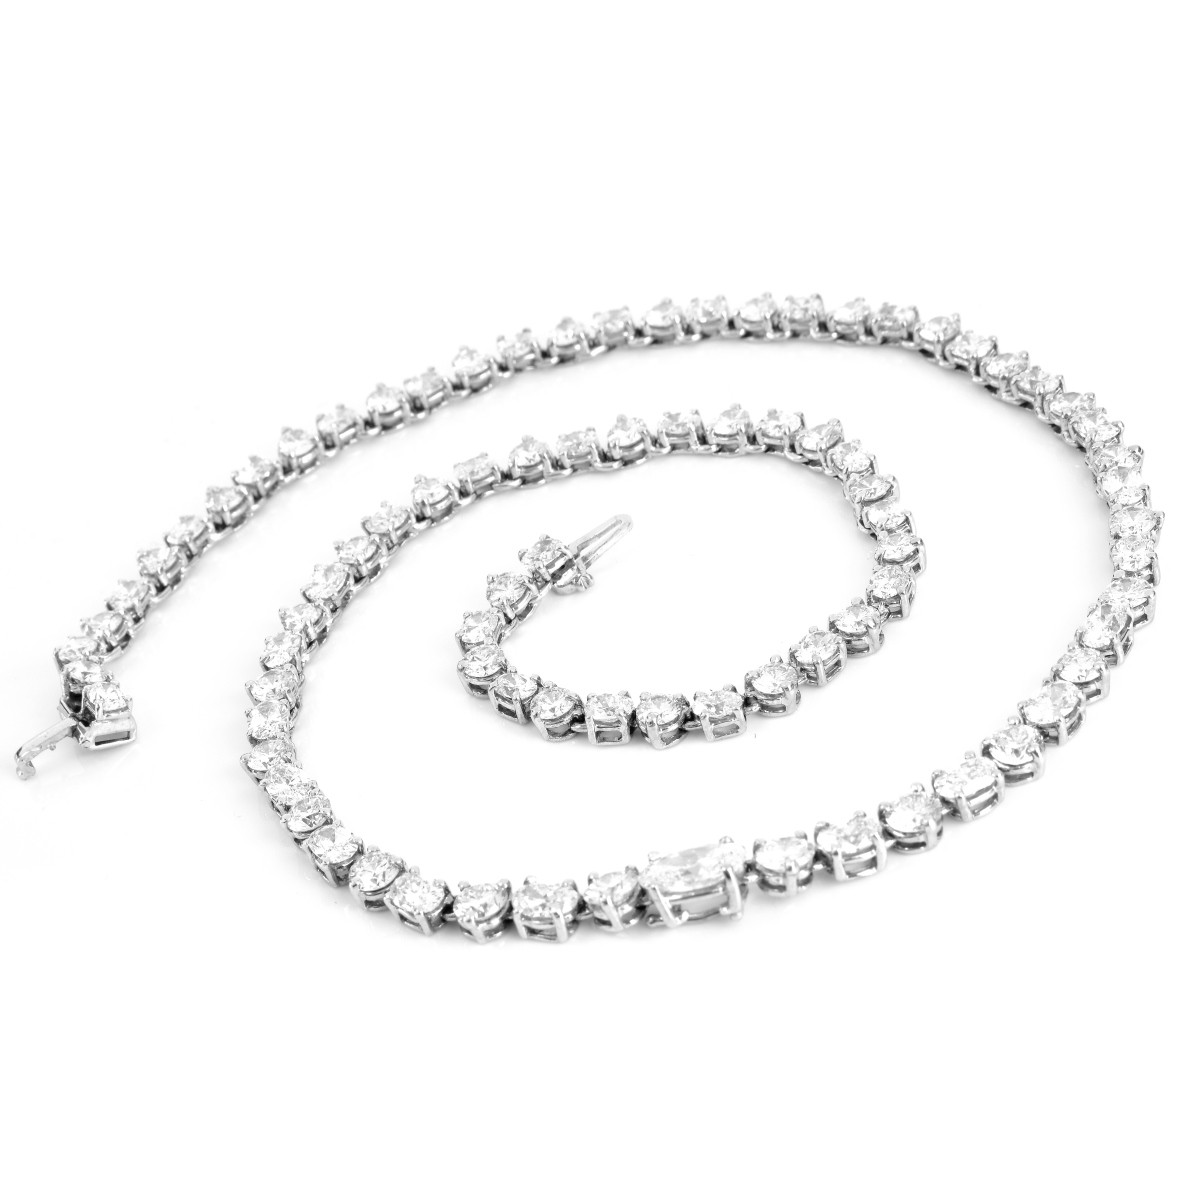 25.0ct Diamond and 14K Gold Riviera Necklace